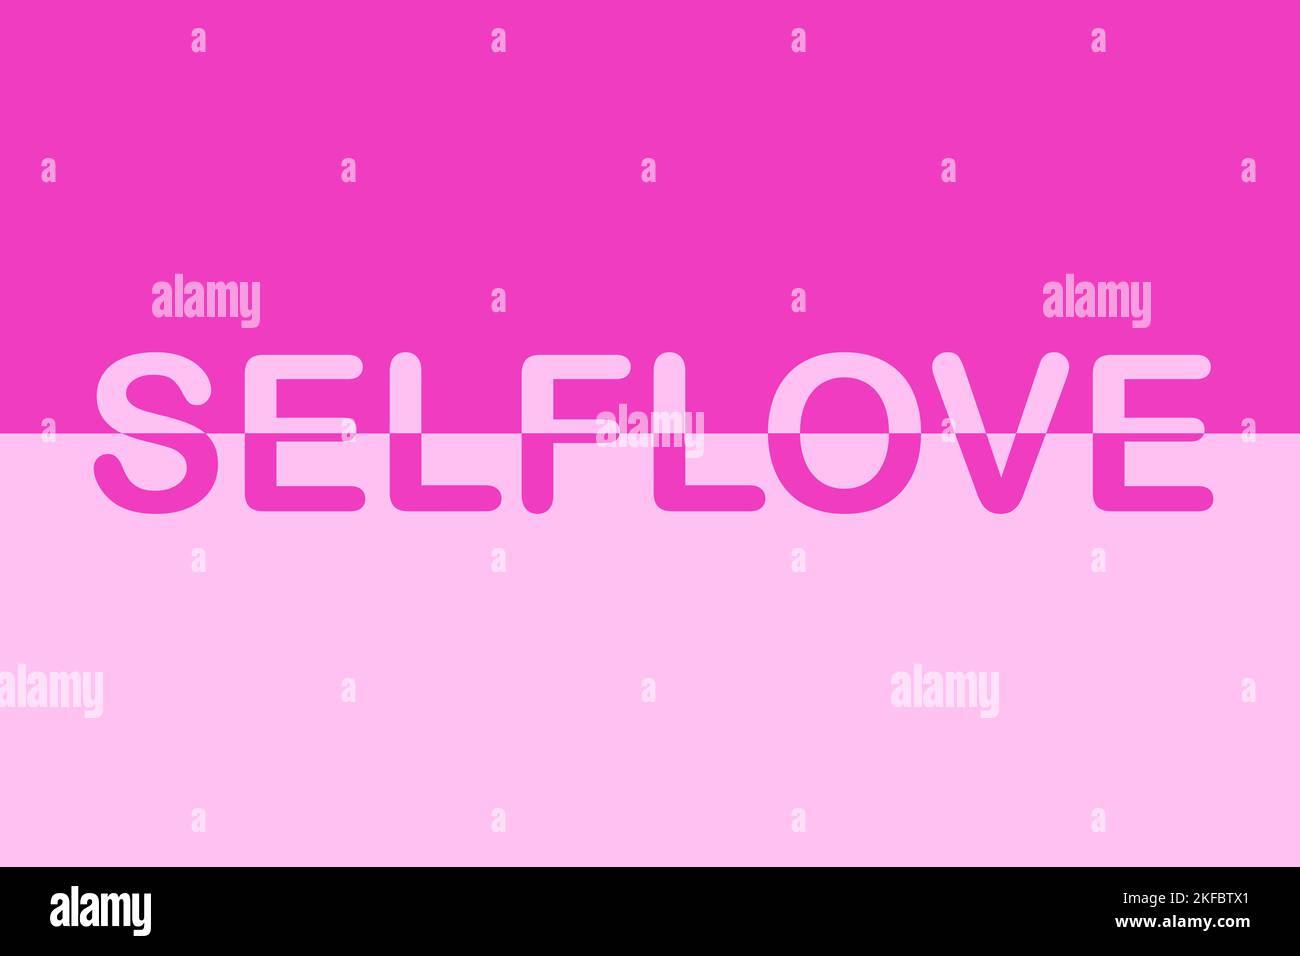 Self love. Text on pink background. Colorful letters. Multicolored lettering for banner. Title, headline. The psychology concept. The message on the p Stock Photo